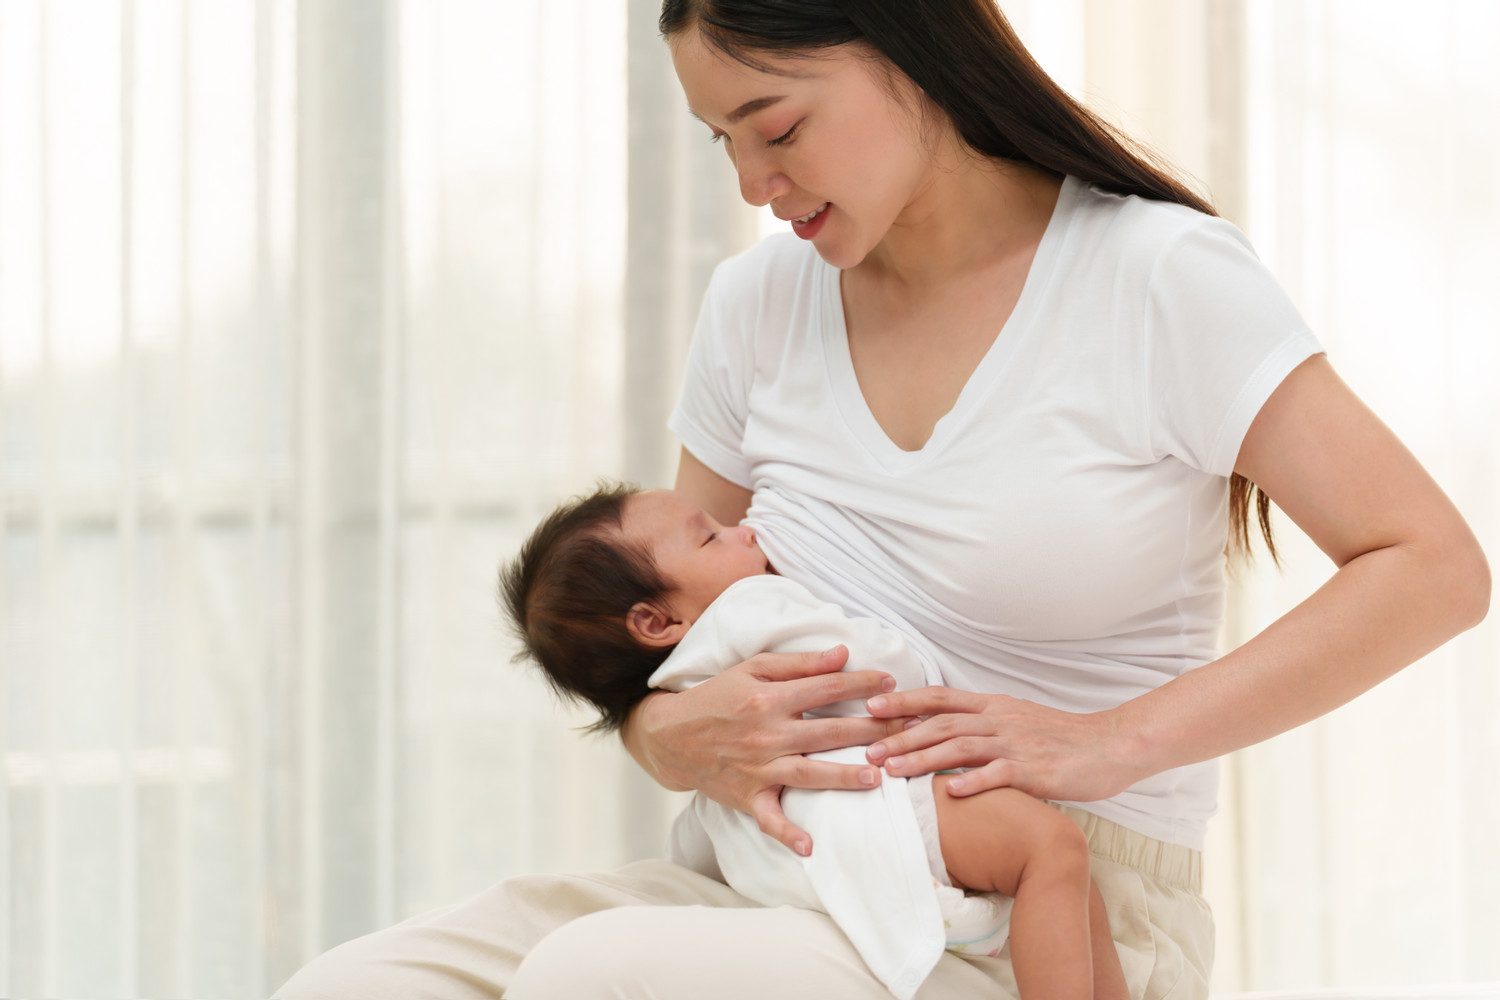 The Importance of Breastfeeding for the Baby